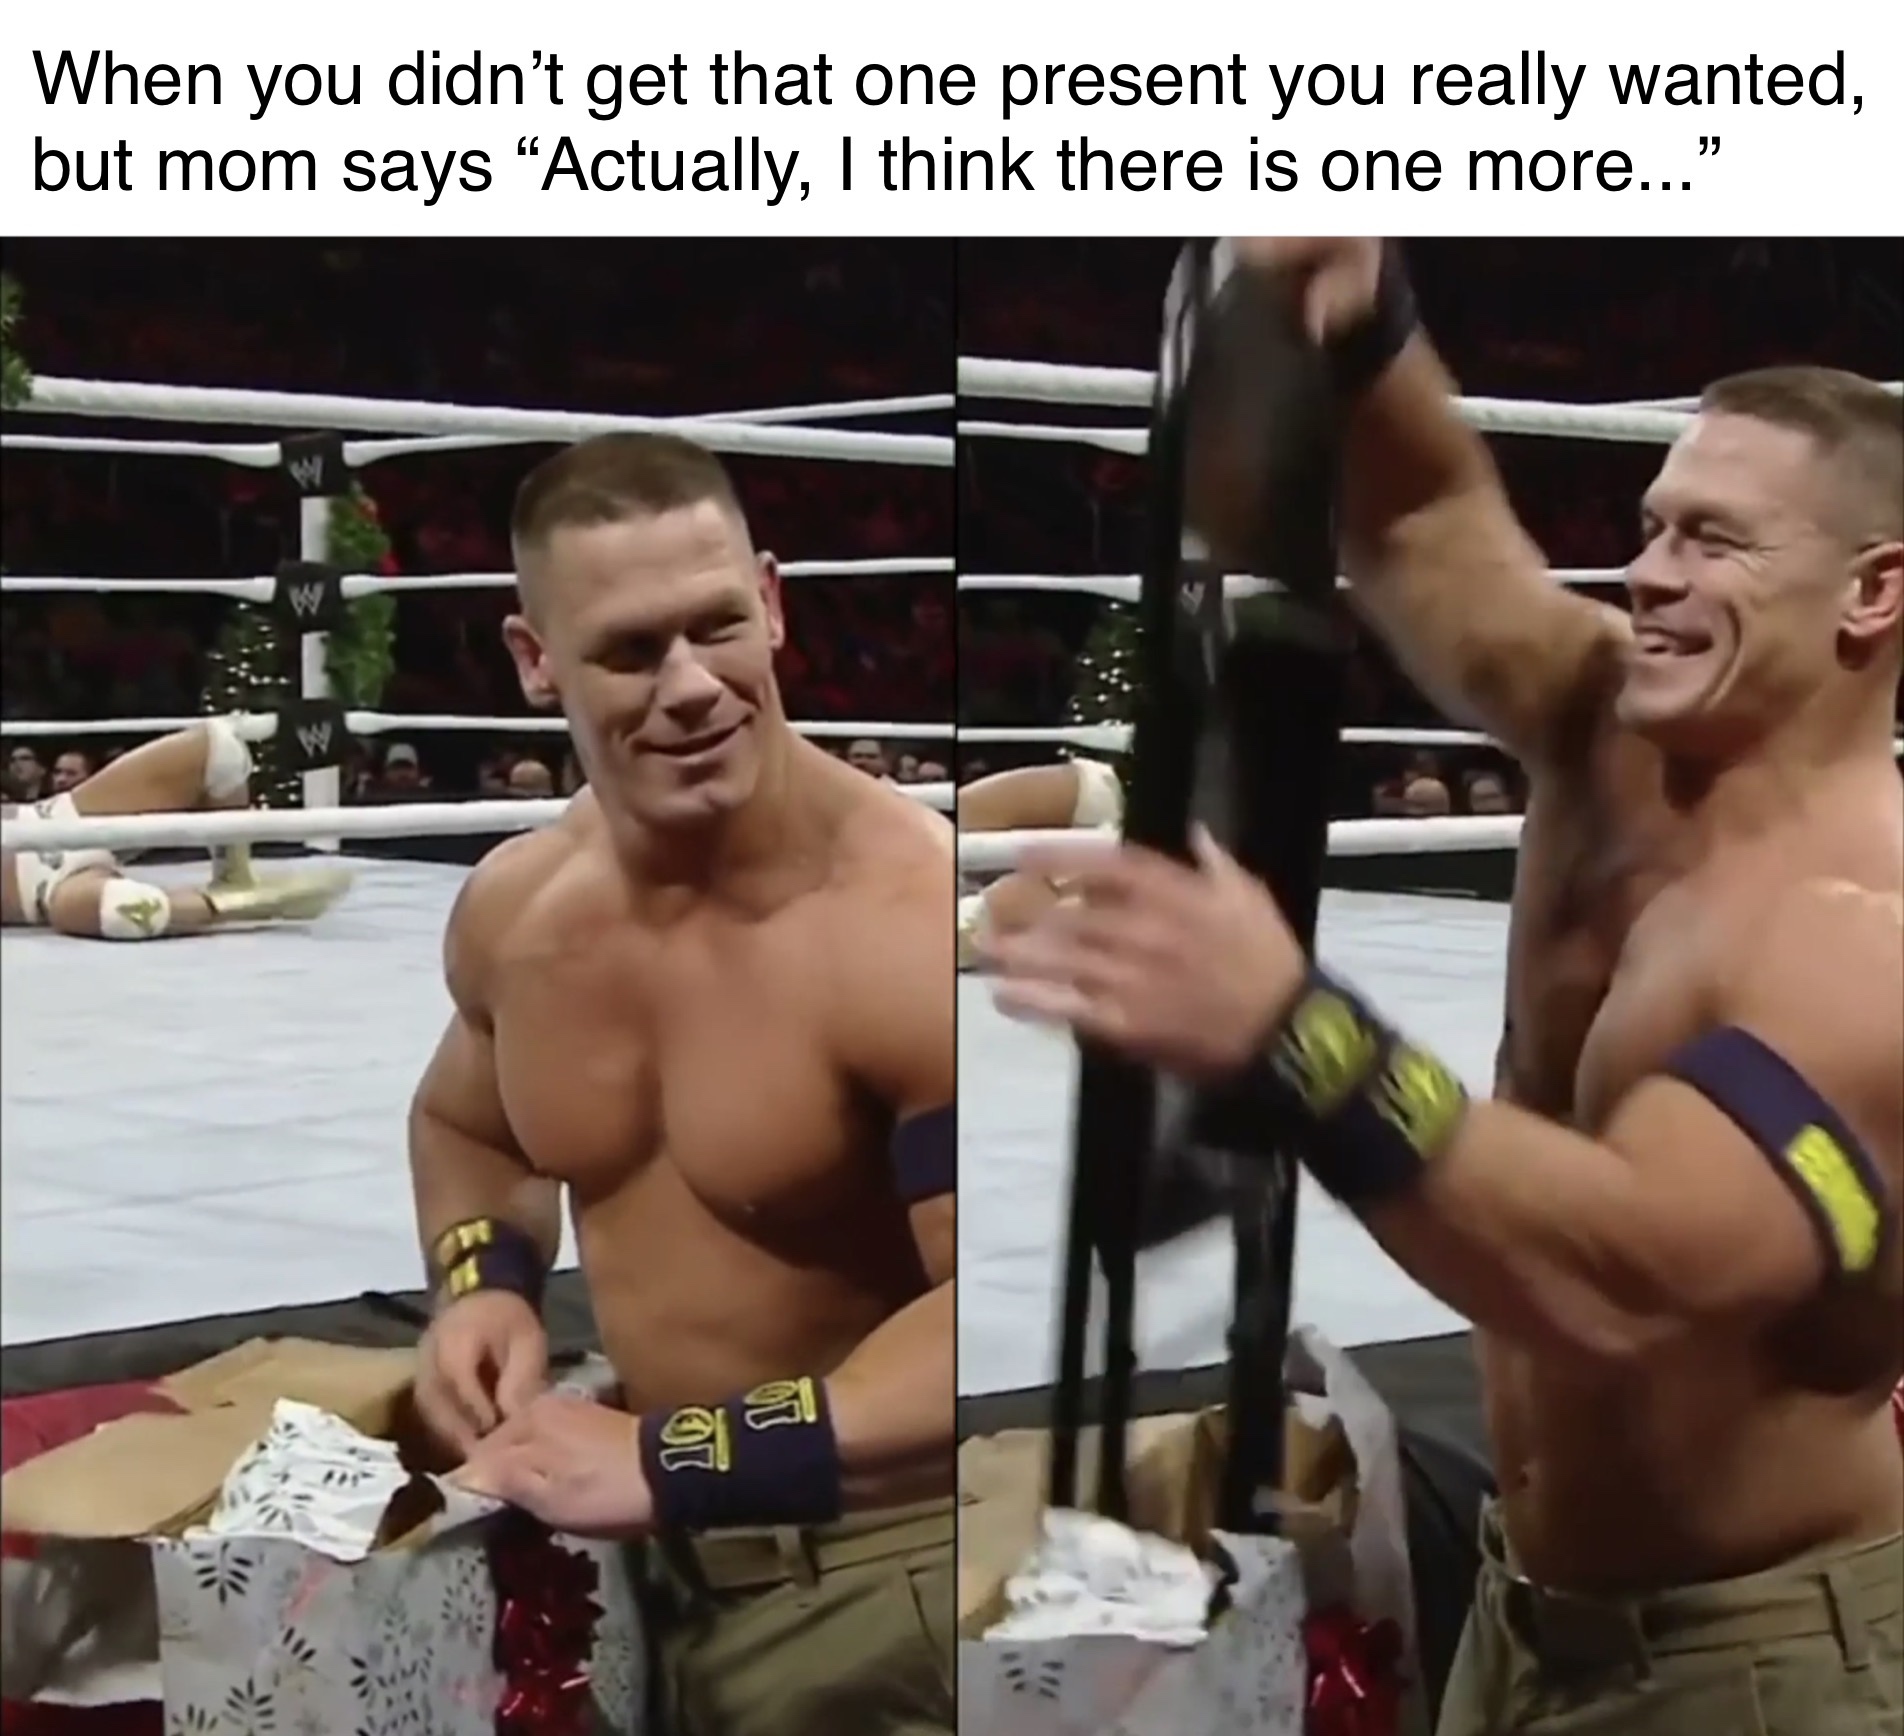 wholesome meme - professional boxing - When you didn't get that one present you really wanted, but mom says "Actually, I think there is one more..."